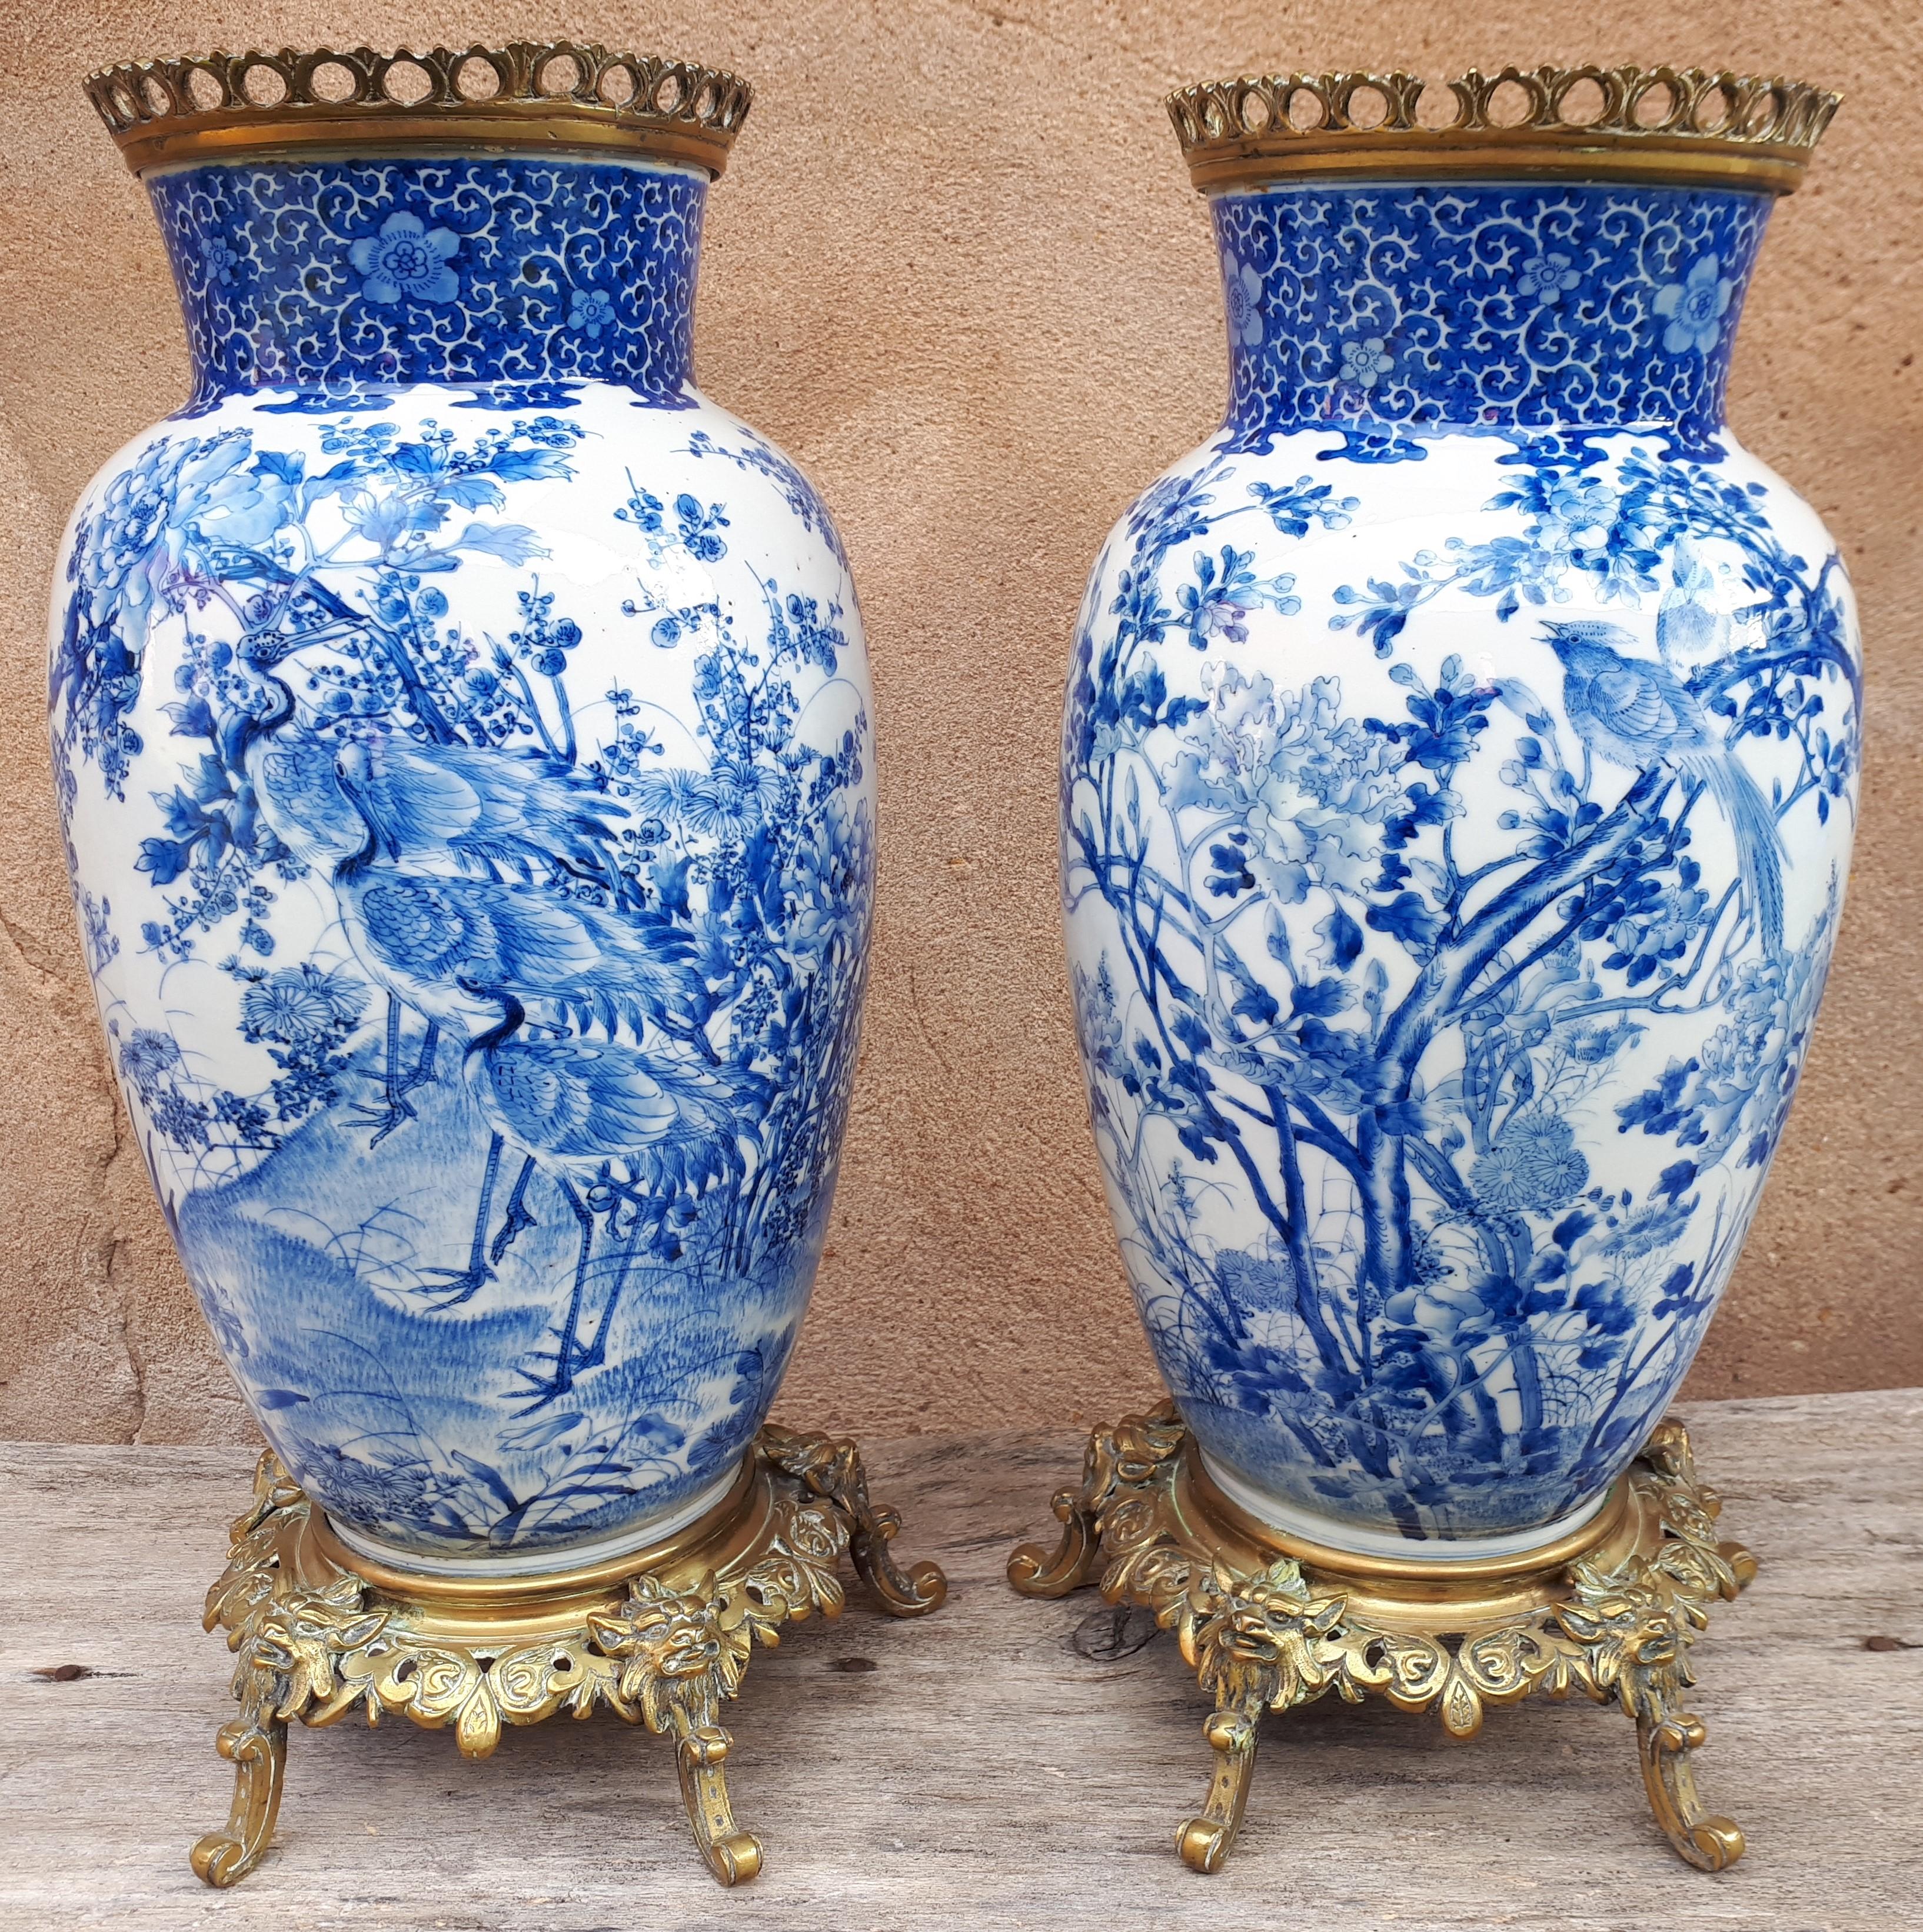 Pair of porcelain vases with rich blue decoration under the cover of birds among the vegetation.
Extraordinary quality of execution, very detailed. Beautiful, deep blue color.
Vases in perfect condition, including necks.
Japan, second half of the